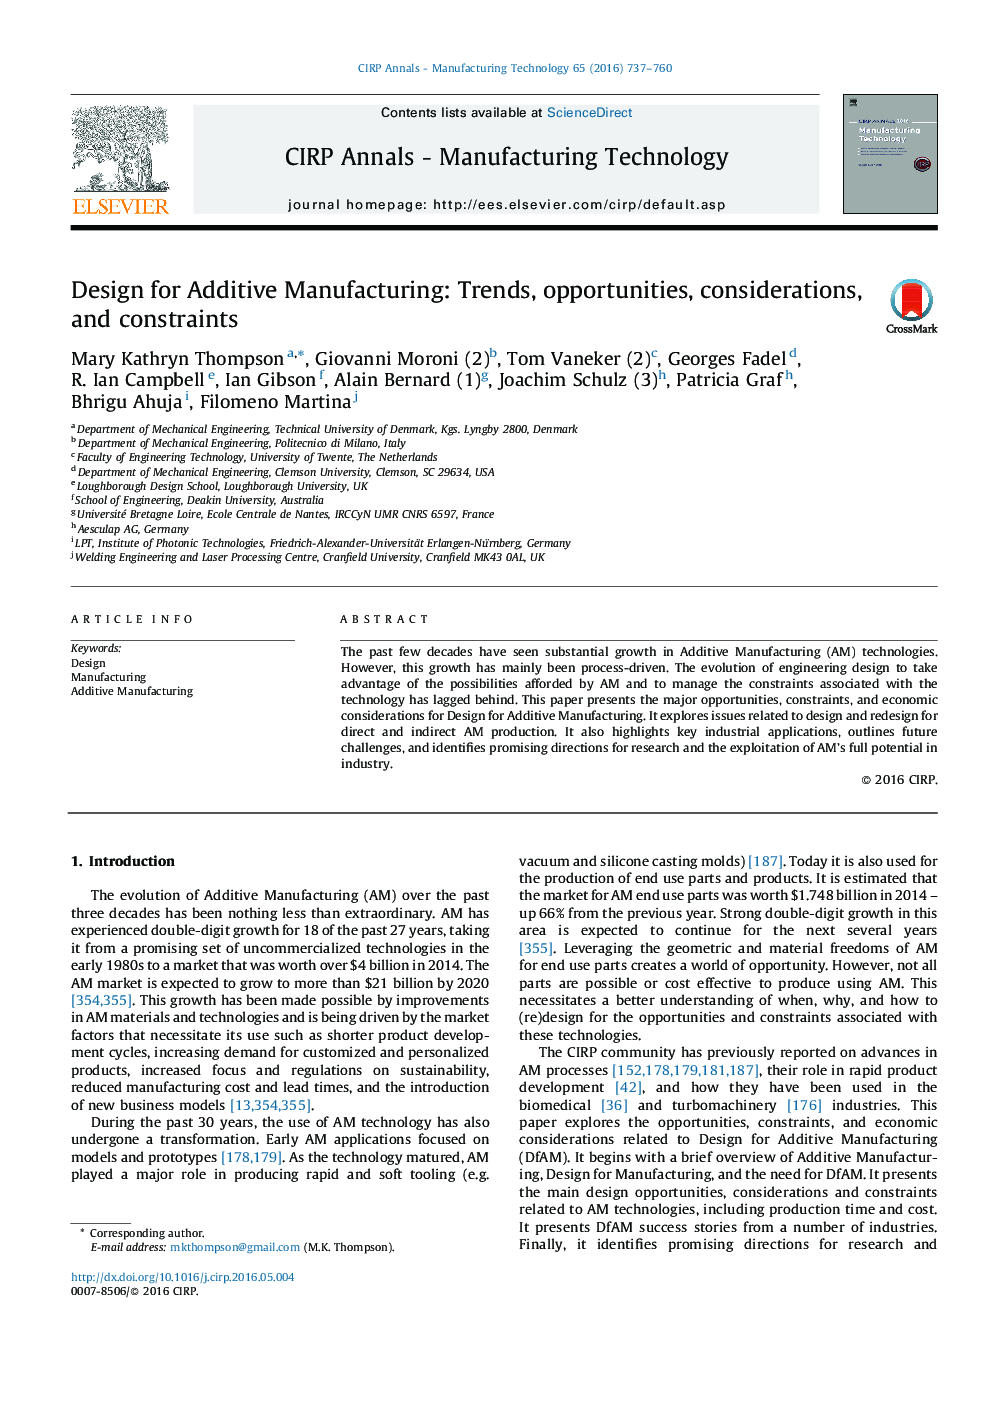 Design for Additive Manufacturing: Trends, opportunities, considerations, and constraints